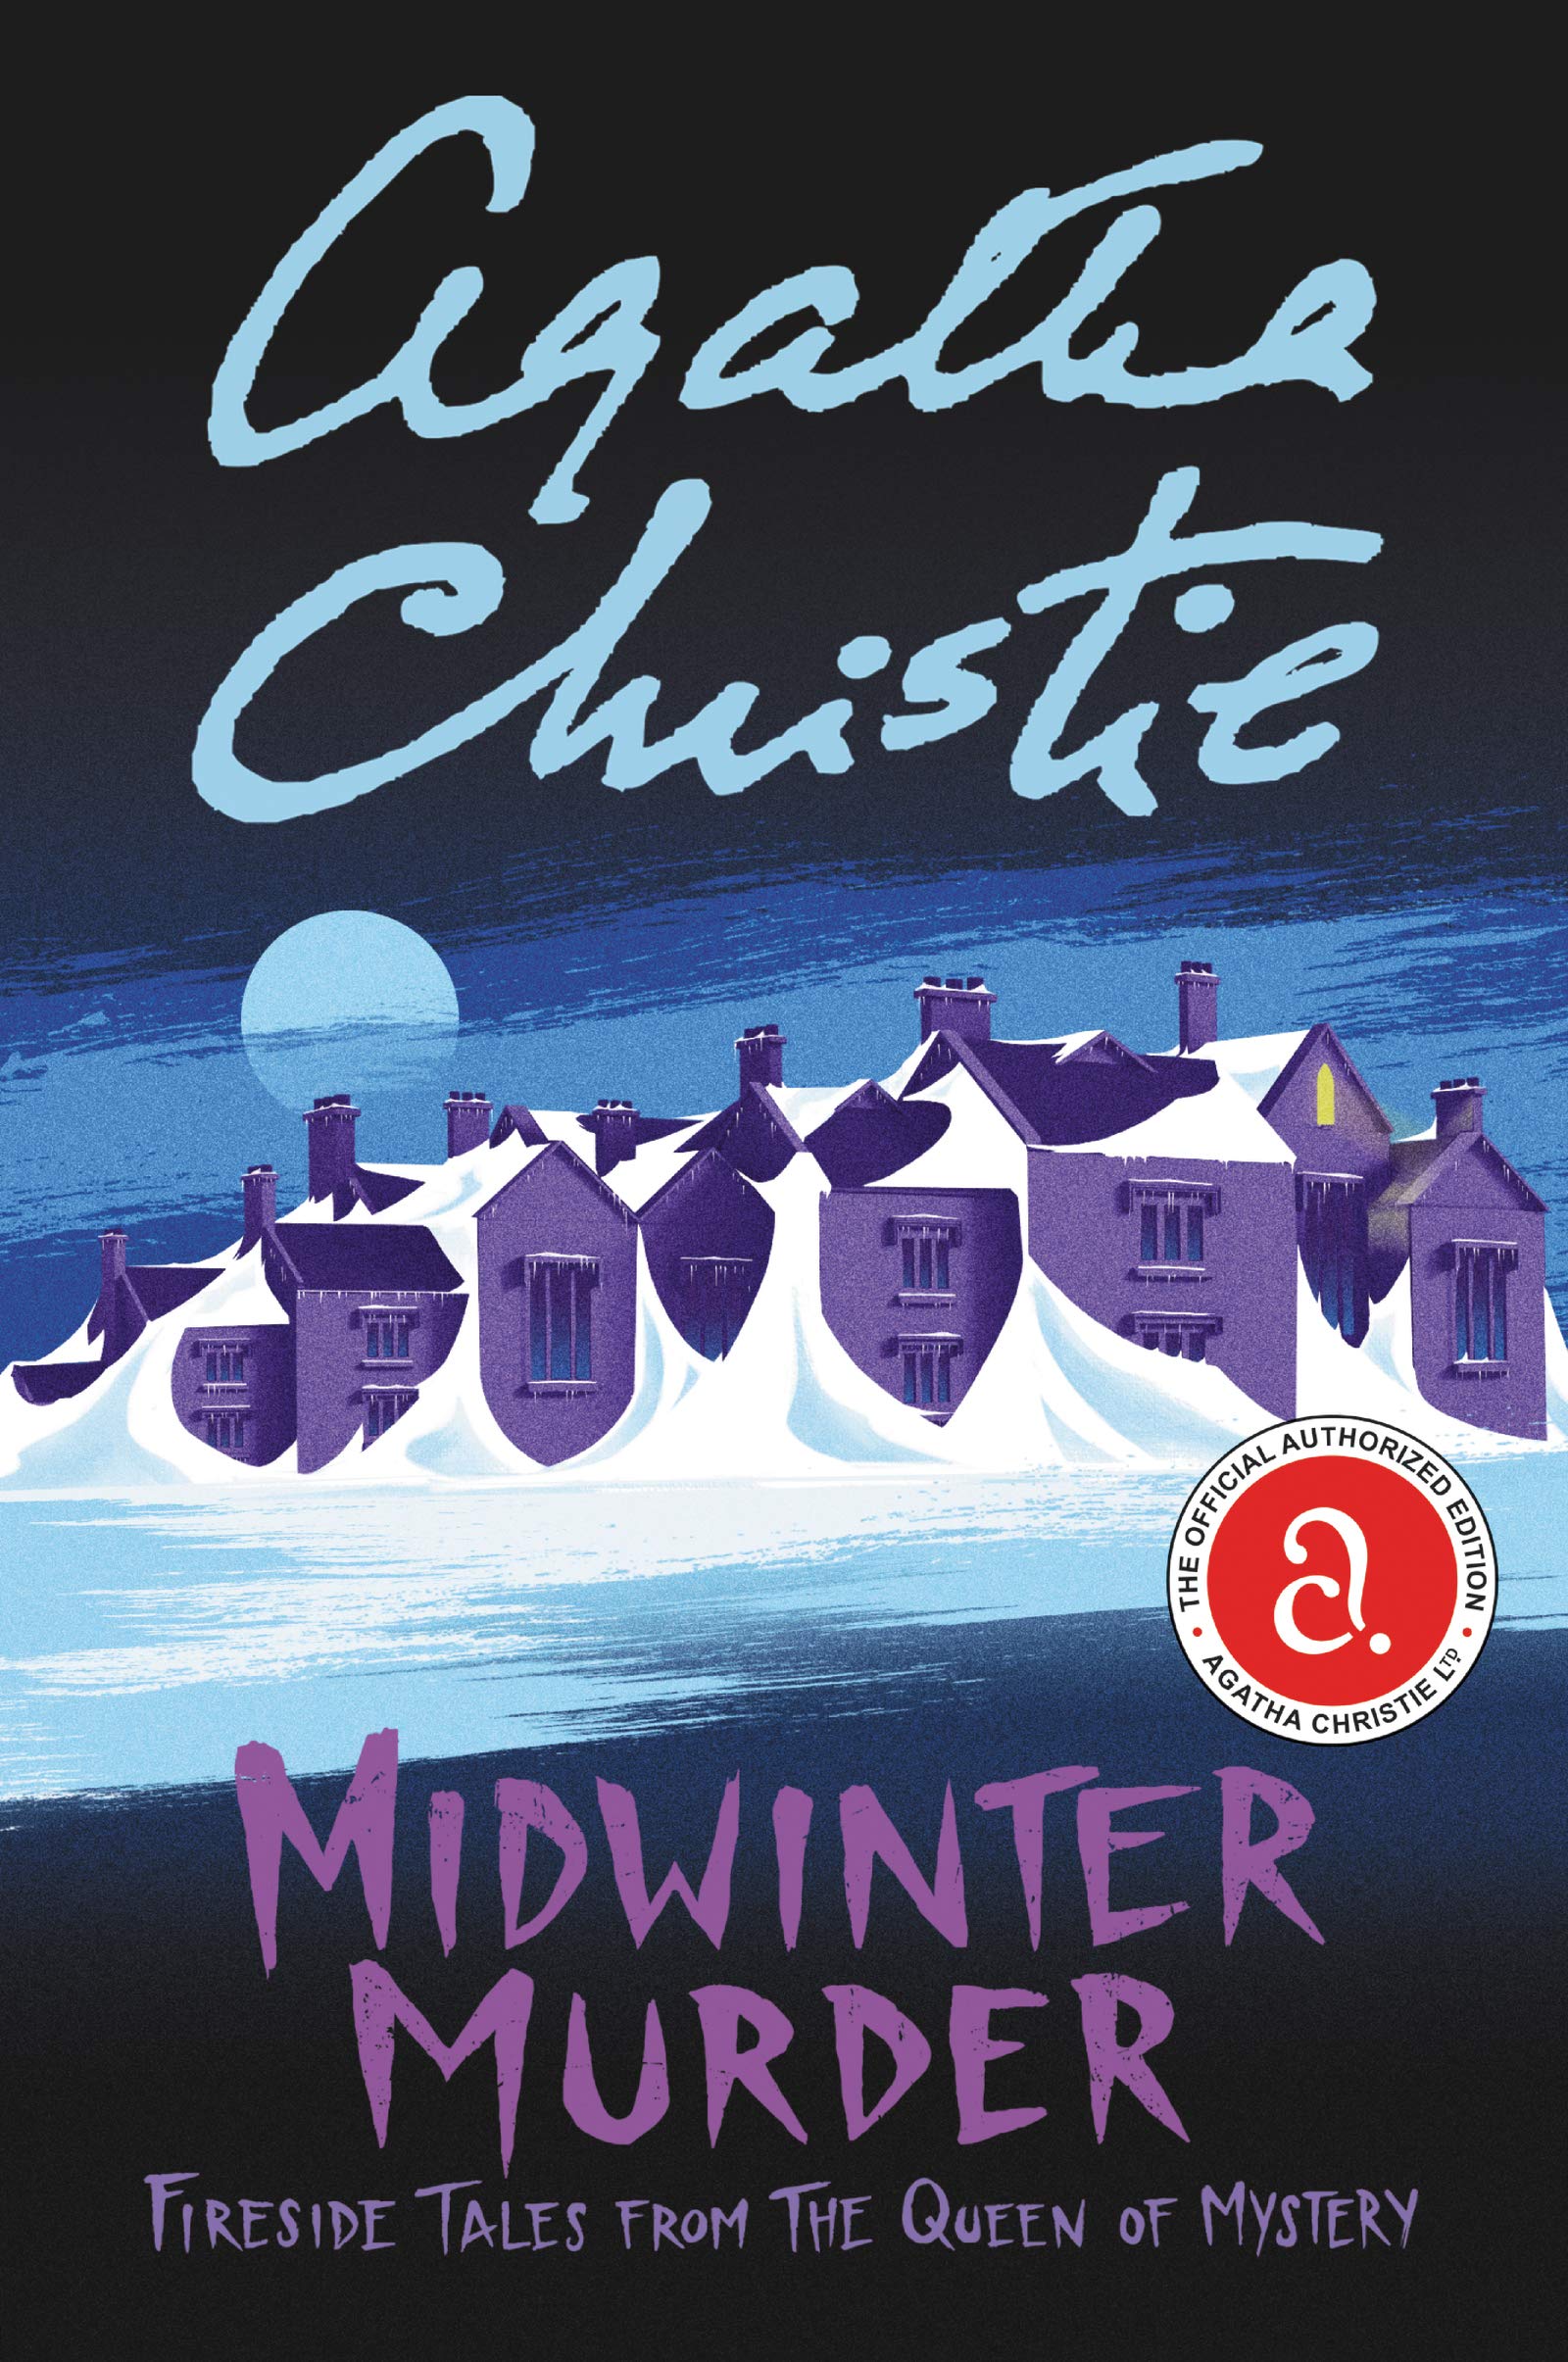 Midwinter Murder: Fireside Tales from the Queen of Mystery